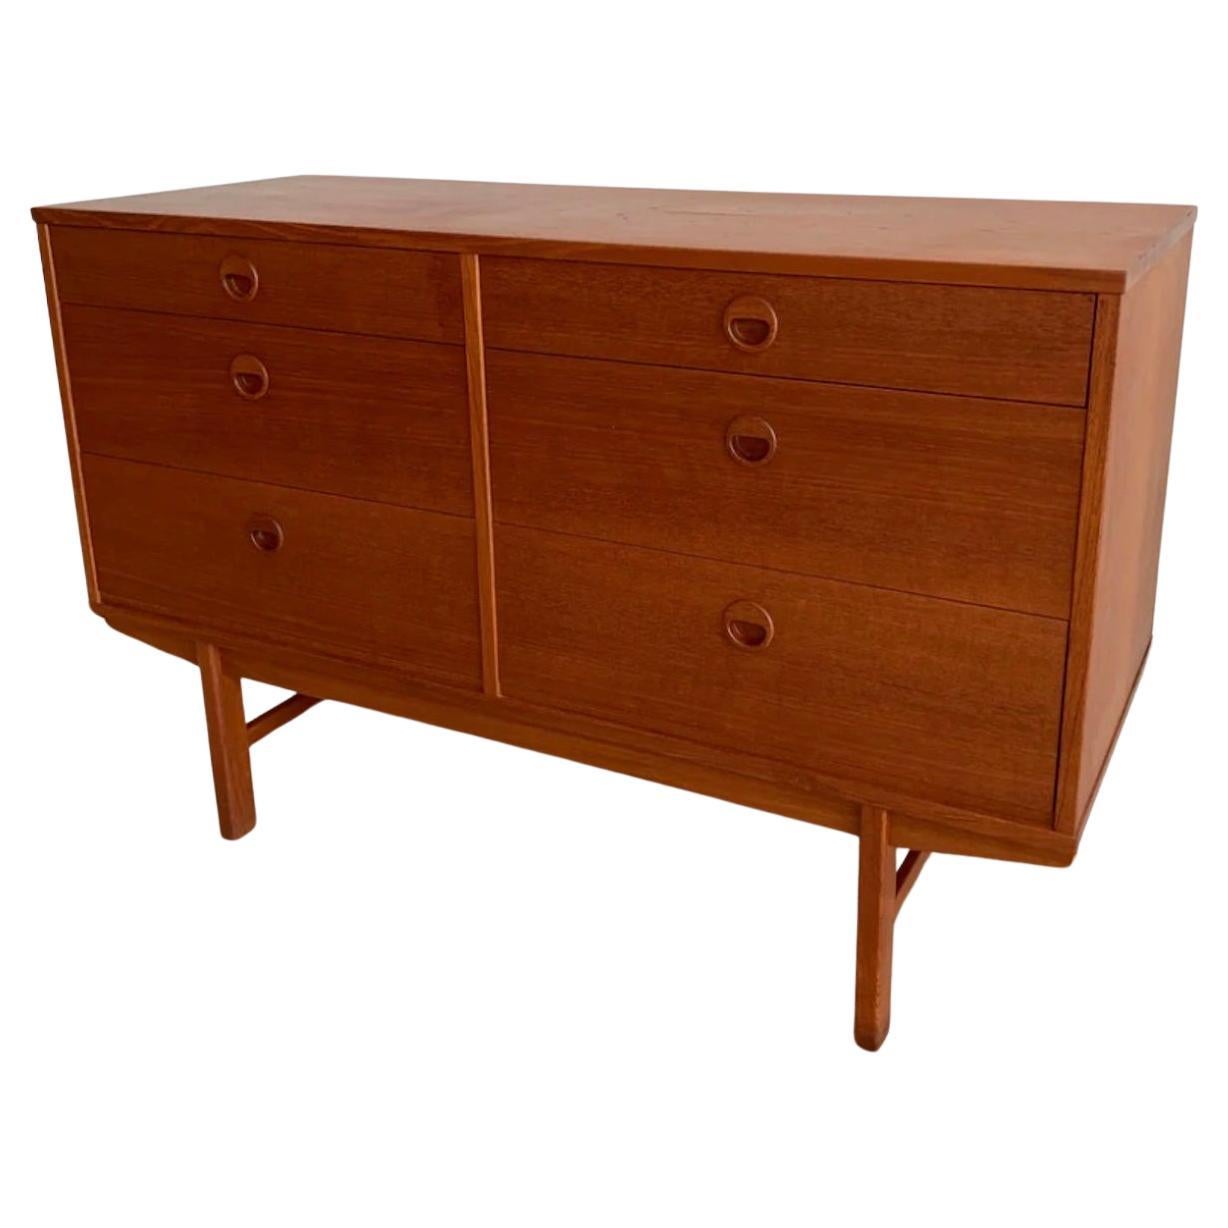 Great Simple 6-drawer credenza in teak. Six deep drawers, with dovetail construction. Designed by Folke Ohlsson for Dux, made in Sweden. Dresser is in good vintage condition. 

48